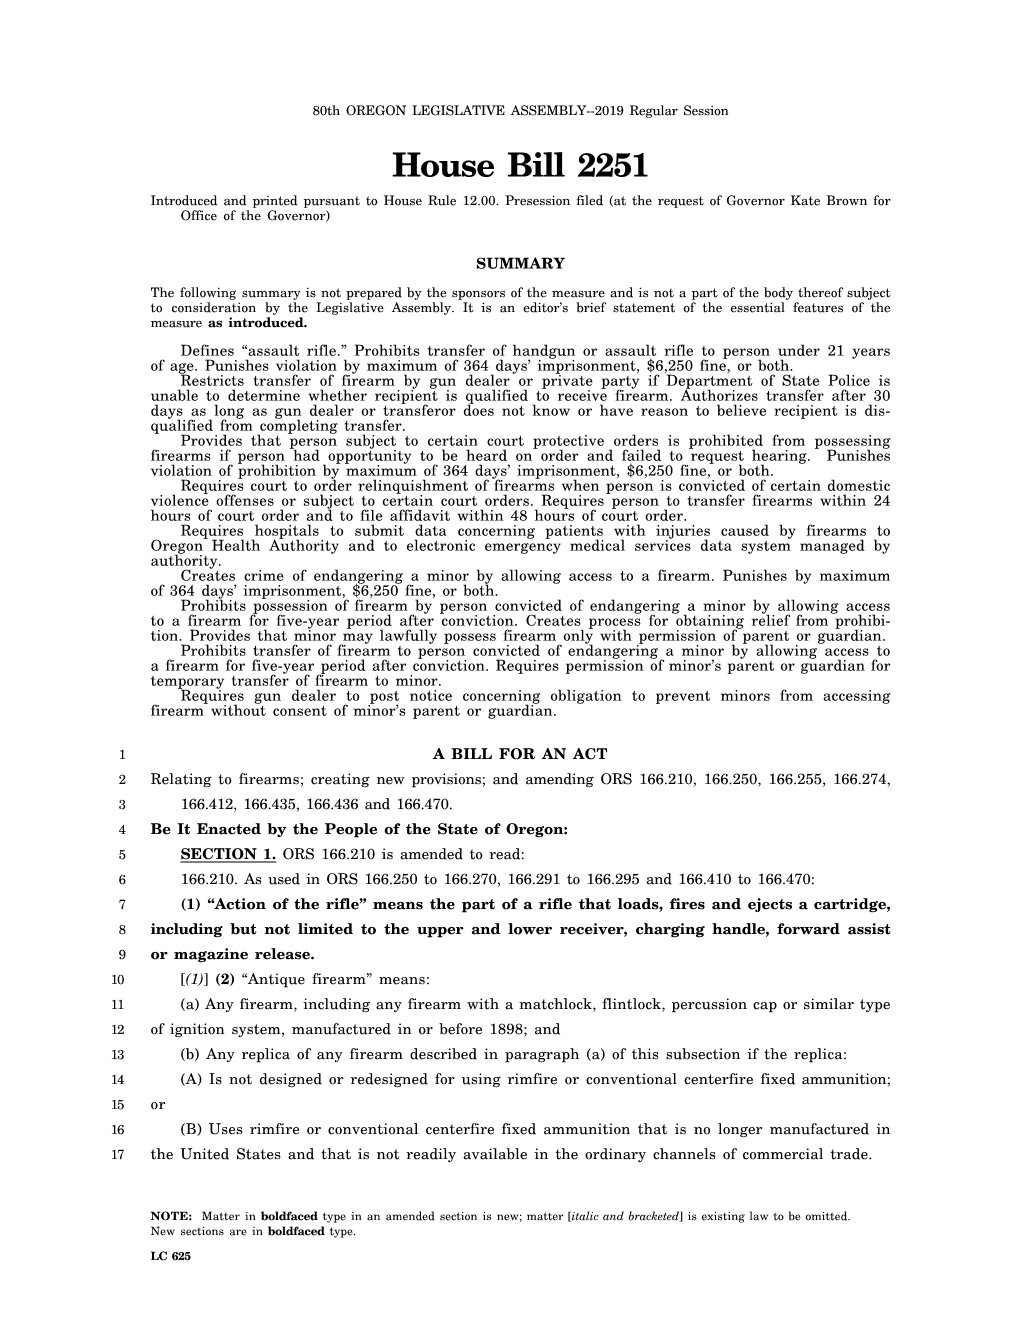 House Bill 2251 Introduced and Printed Pursuant to House Rule 12.00